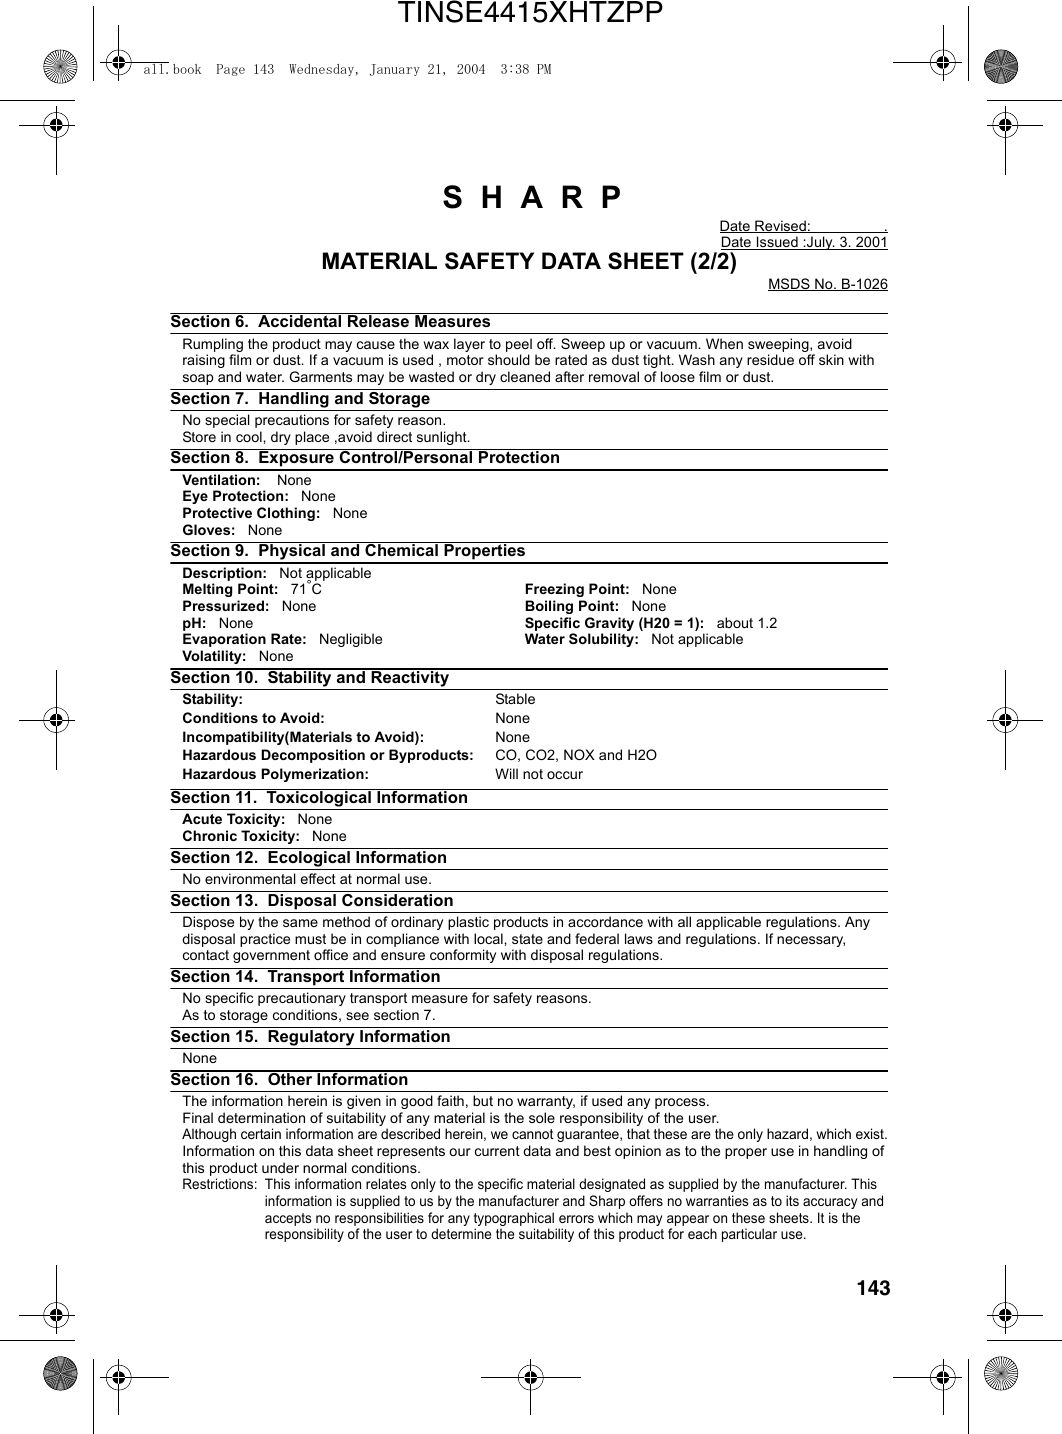 143 S  H  A  R  PDate Revised:                  .Date Issued :July. 3. 2001MATERIAL SAFETY DATA SHEET (2/2)MSDS No. B-1026Section 6.  Accidental Release Measures Rumpling the product may cause the wax layer to peel off. Sweep up or vacuum. When sweeping, avoid raising film or dust. If a vacuum is used , motor should be rated as dust tight. Wash any residue off skin with soap and water. Garments may be wasted or dry cleaned after removal of loose film or dust.Section 7.  Handling and Storage No special precautions for safety reason.Store in cool, dry place ,avoid direct sunlight.Section 8.  Exposure Control/Personal Protection   Ventilation:    NoneEye Protection:   NoneProtective Clothing:   NoneGloves:   NoneSection 9.  Physical and Chemical Properties Description:   Not applicableMelting Point:   71°CFreezing Point:   NonePressurized:   None Boiling Point:   NonepH:   None Specific Gravity (H20 = 1):   about 1.2Evaporation Rate:   Negligible Water Solubility:   Not applicableVolatility:   NoneSection 10.  Stability and Reactivity Stability: StableConditions to Avoid: NoneIncompatibility(Materials to Avoid): NoneHazardous Decomposition or Byproducts: CO, CO2, NOX and H2OHazardous Polymerization: Will not occurSection 11.  Toxicological Information Acute Toxicity:   NoneChronic Toxicity:   NoneSection 12.  Ecological Information        No environmental effect at normal use.Section 13.  Disposal Consideration     Dispose by the same method of ordinary plastic products in accordance with all applicable regulations. Any disposal practice must be in compliance with local, state and federal laws and regulations. If necessary, contact government office and ensure conformity with disposal regulations.Section 14.  Transport Information  No specific precautionary transport measure for safety reasons.As to storage conditions, see section 7.Section 15.  Regulatory Information None   Section 16.  Other InformationThe information herein is given in good faith, but no warranty, if used any process.Final determination of suitability of any material is the sole responsibility of the user.Although certain information are described herein, we cannot guarantee, that these are the only hazard, which exist.Information on this data sheet represents our current data and best opinion as to the proper use in handling of this product under normal conditions.Restrictions: This information relates only to the specific material designated as supplied by the manufacturer. This information is supplied to us by the manufacturer and Sharp offers no warranties as to its accuracy and accepts no responsibilities for any typographical errors which may appear on these sheets. It is the responsibility of the user to determine the suitability of this product for each particular use.all.book  Page 143  Wednesday, January 21, 2004  3:38 PMTINSE4415XHTZPP